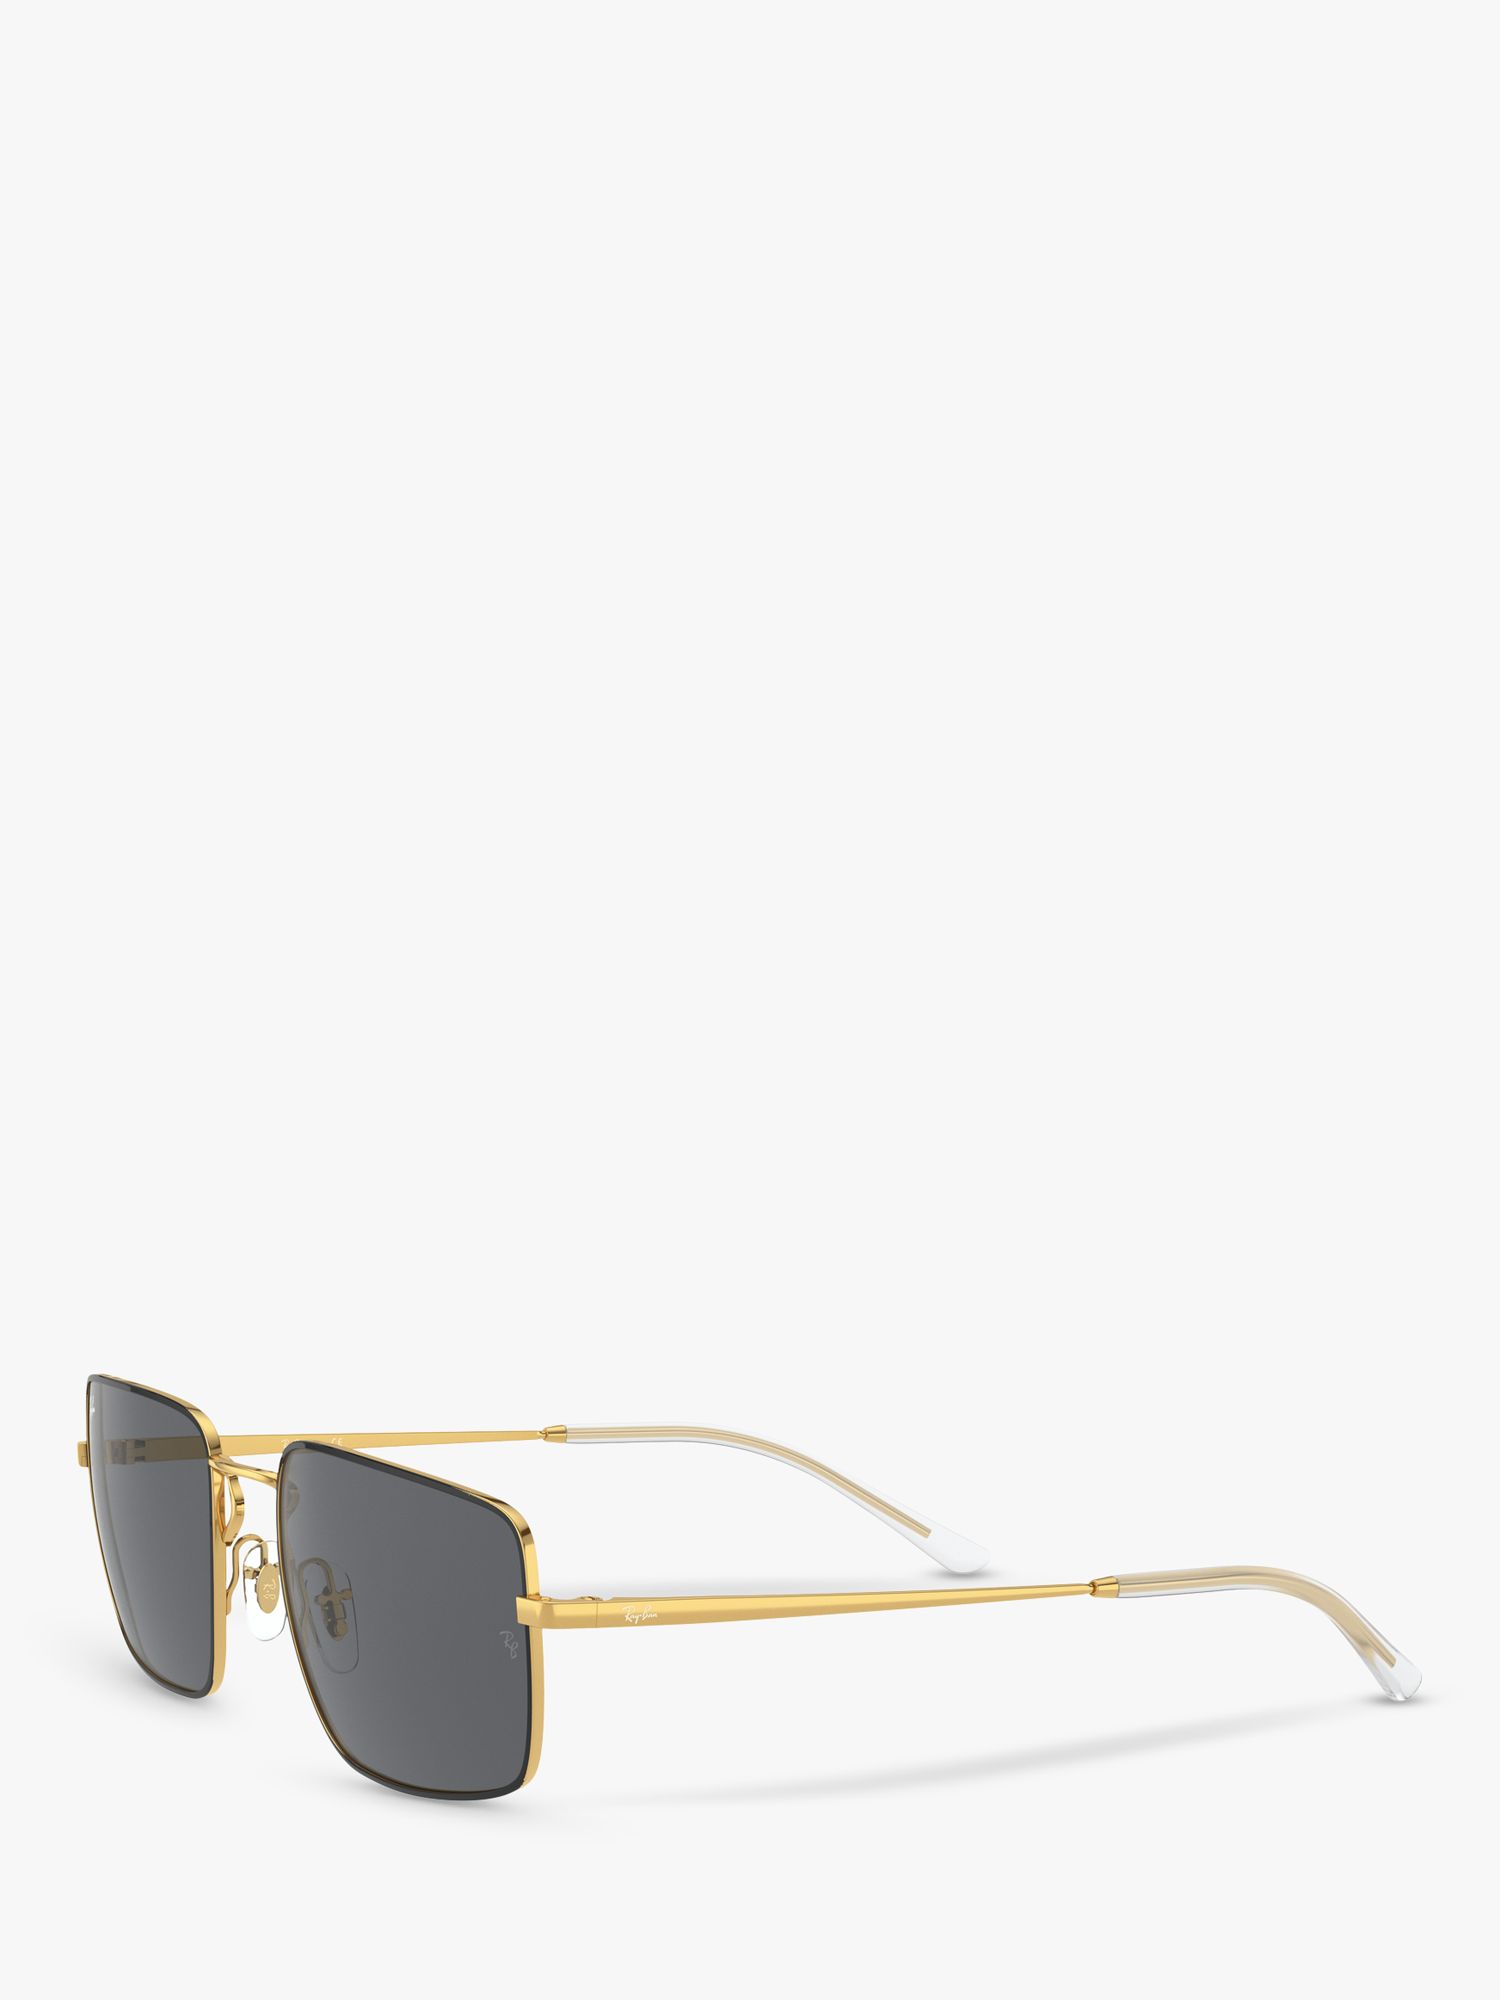 Ray-Ban RB3669 Unisex Metal Square Sunglasses, Arista Gold/Black at ...